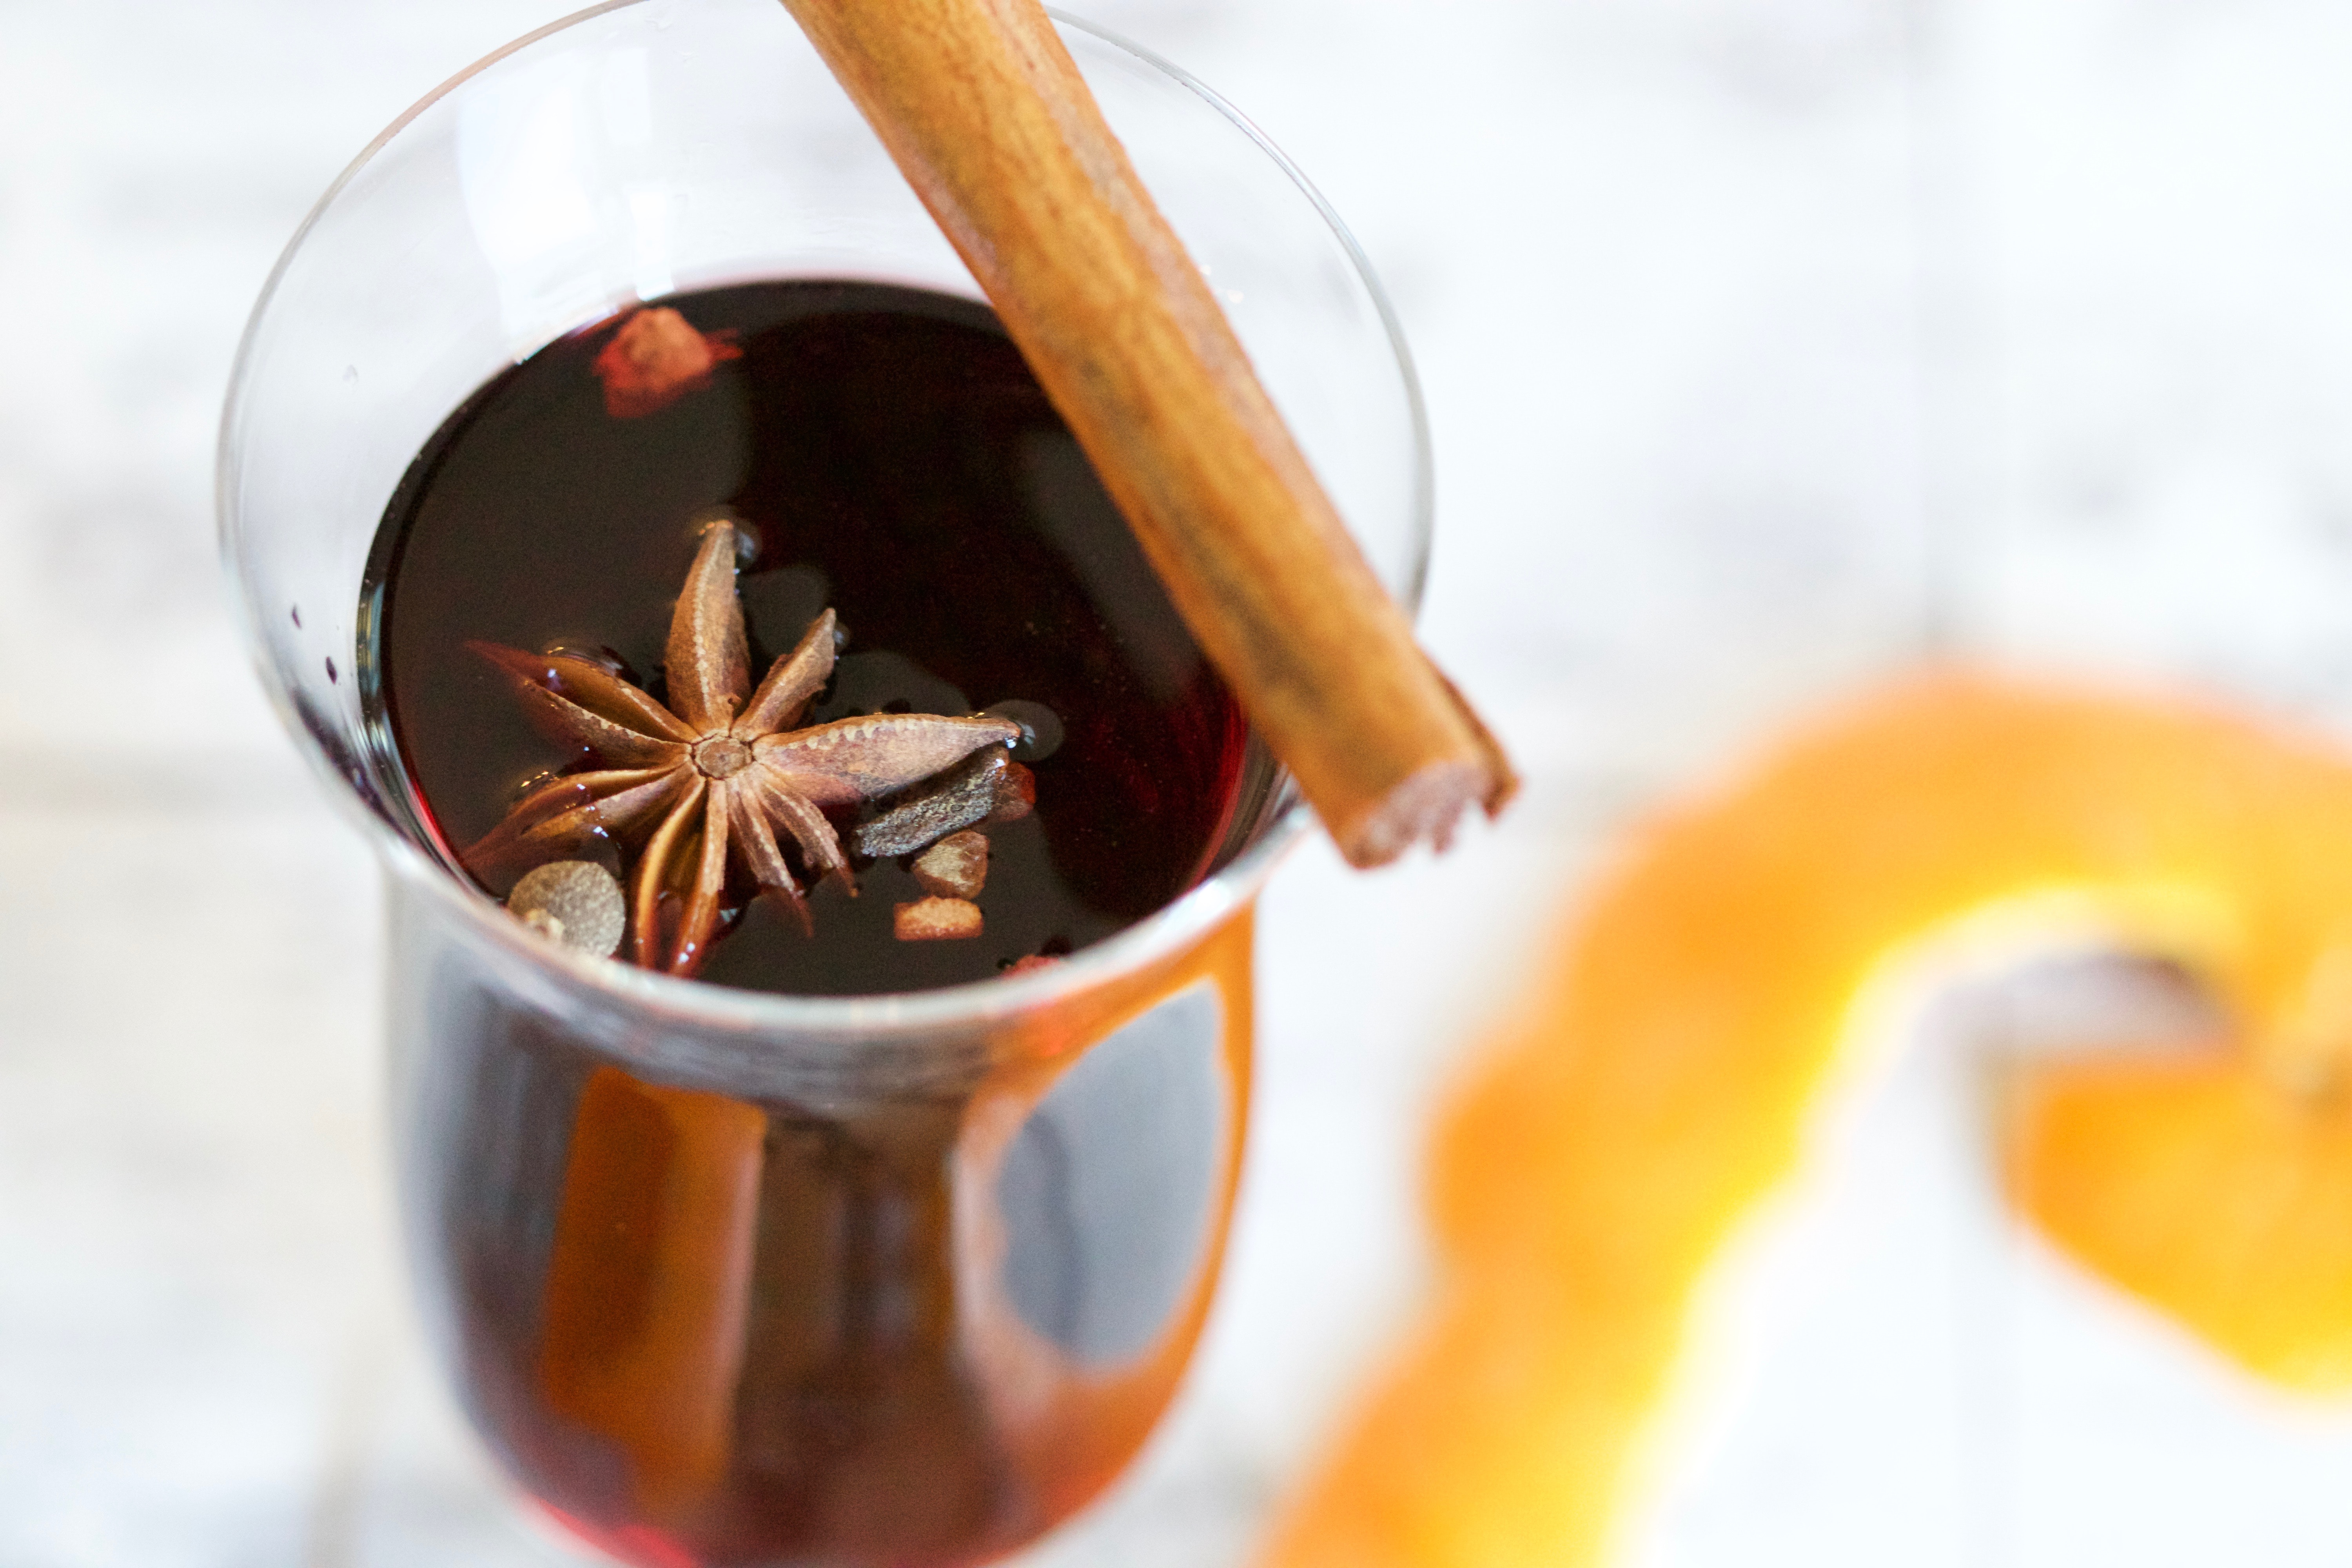 A glass of mulled wine with a stick of Cinnamon balanced on the rim.